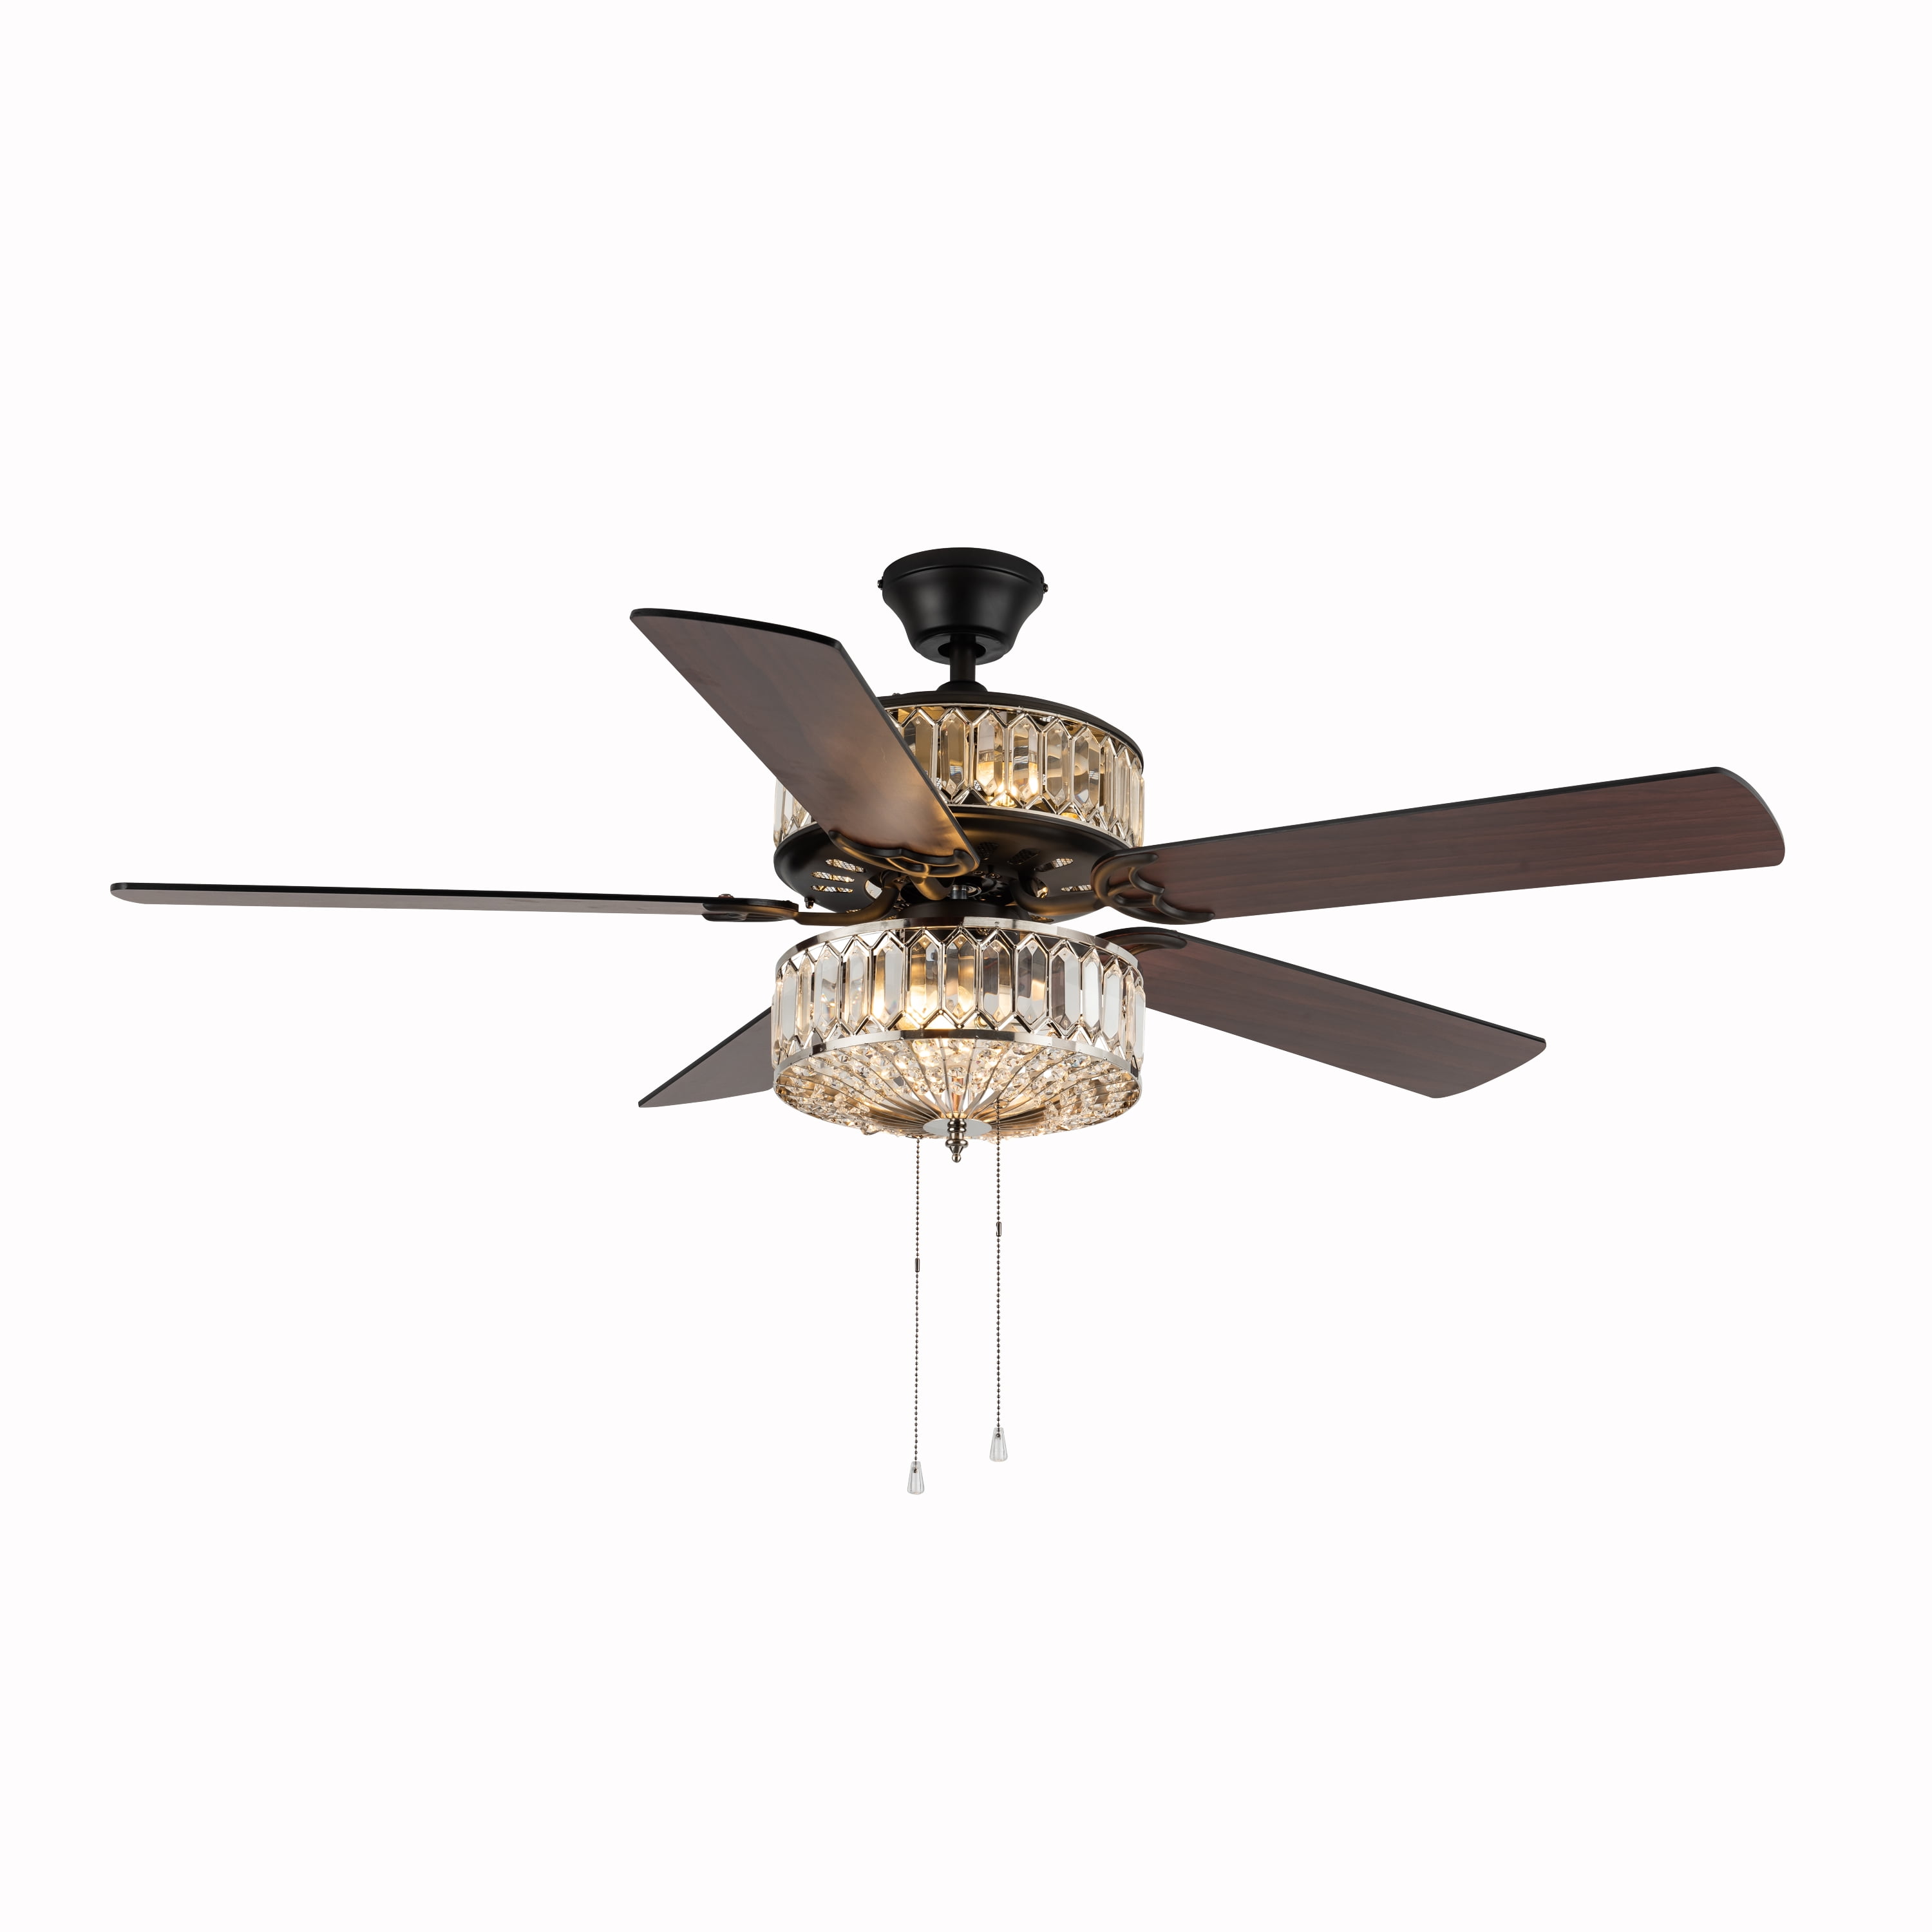 River of Goods Duchess 52 in Clear Crystal LED Ceiling Fan 20060 